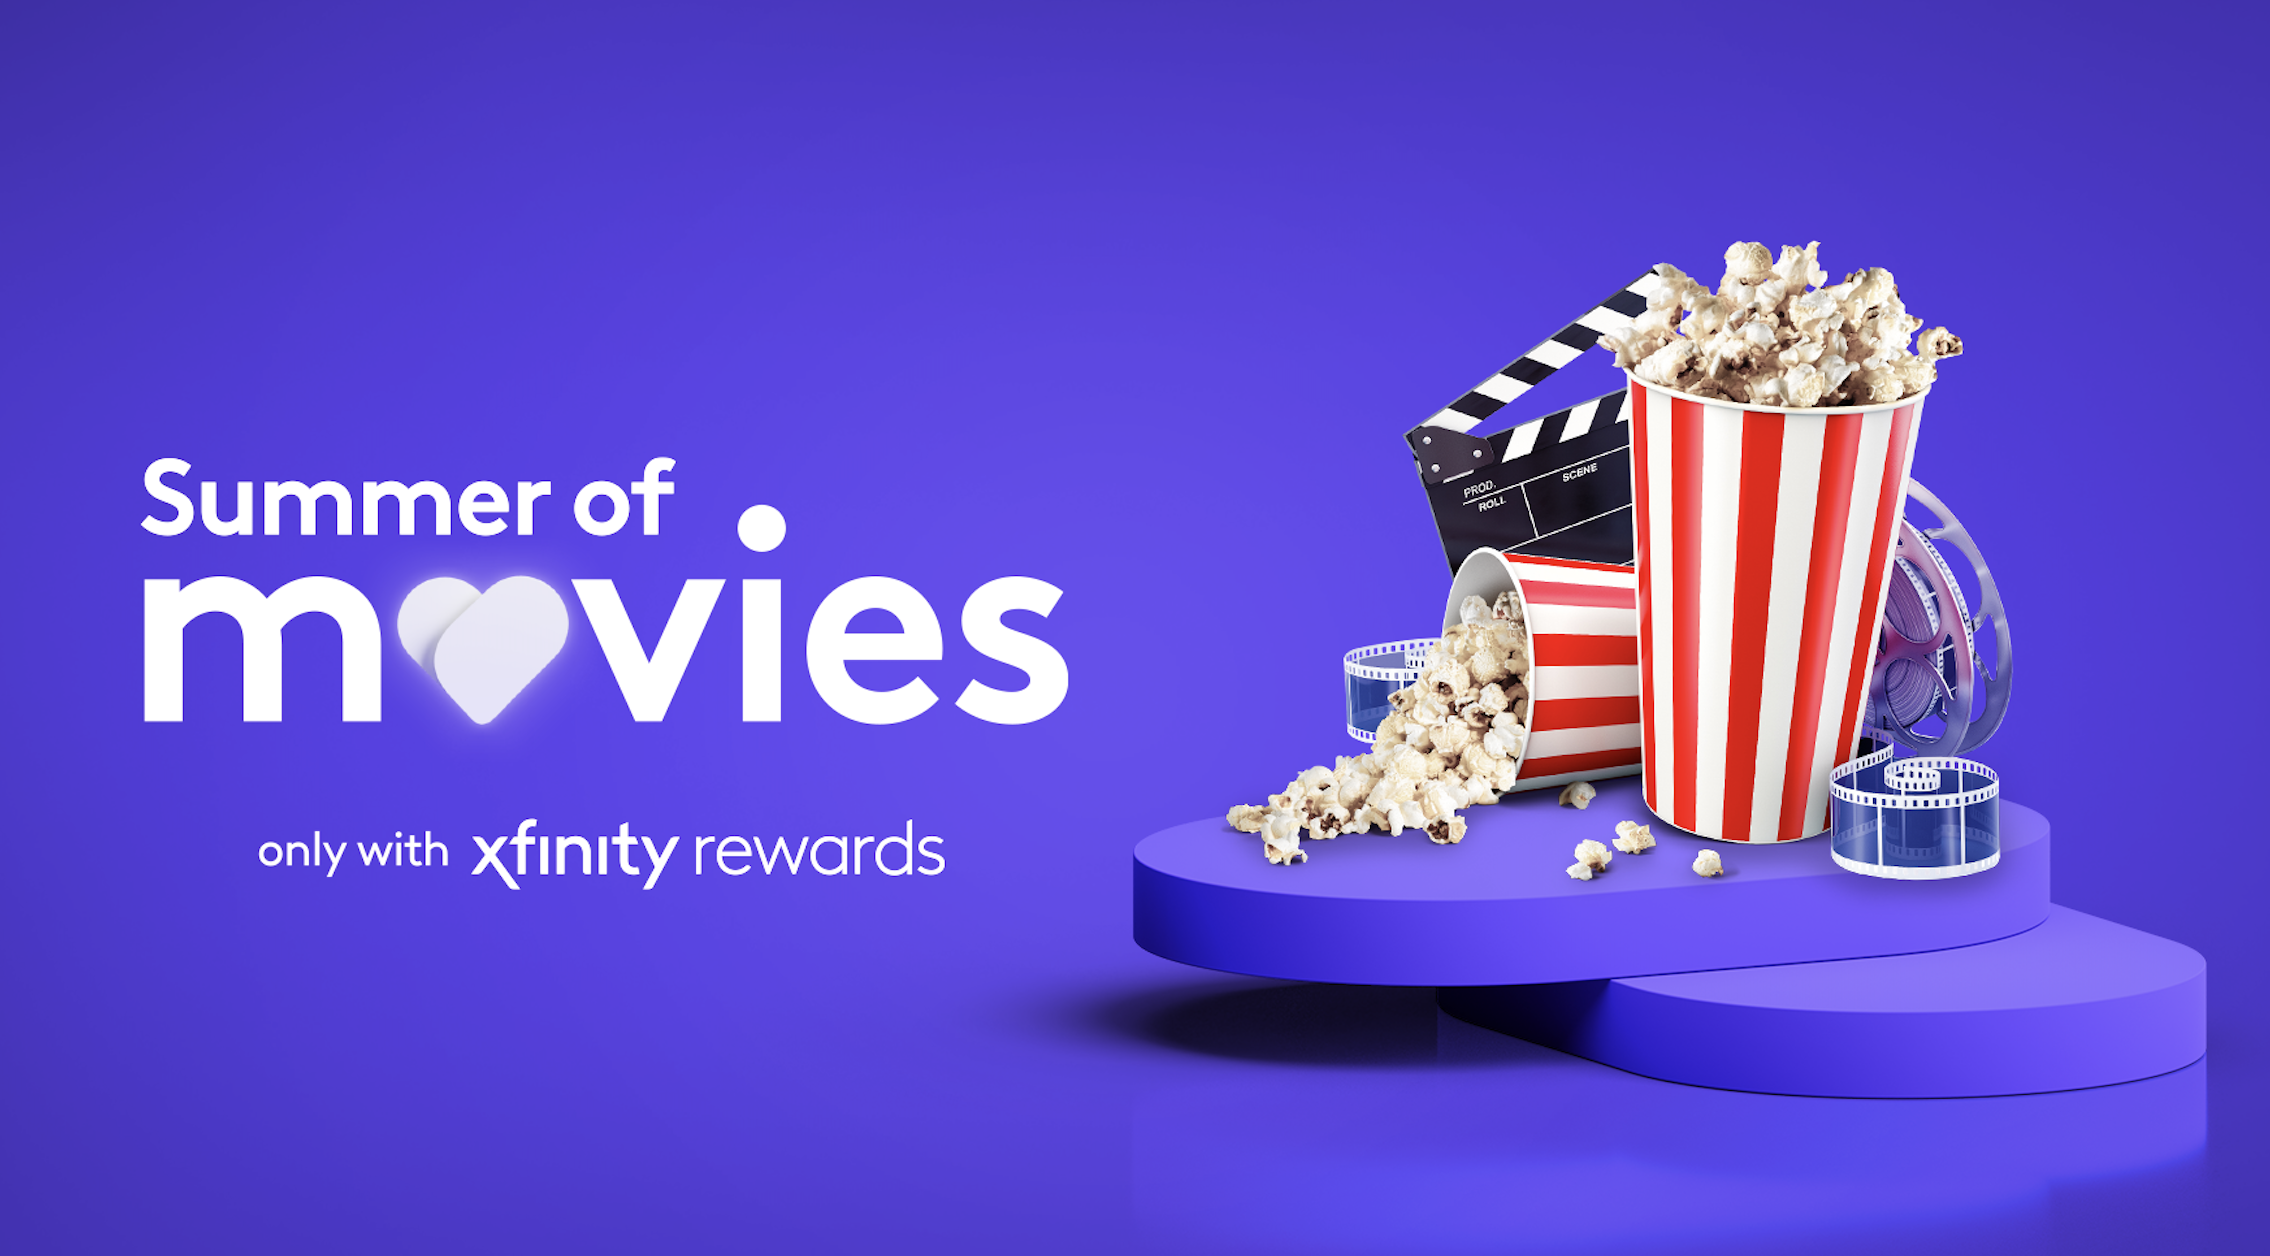 comcast movies for rent